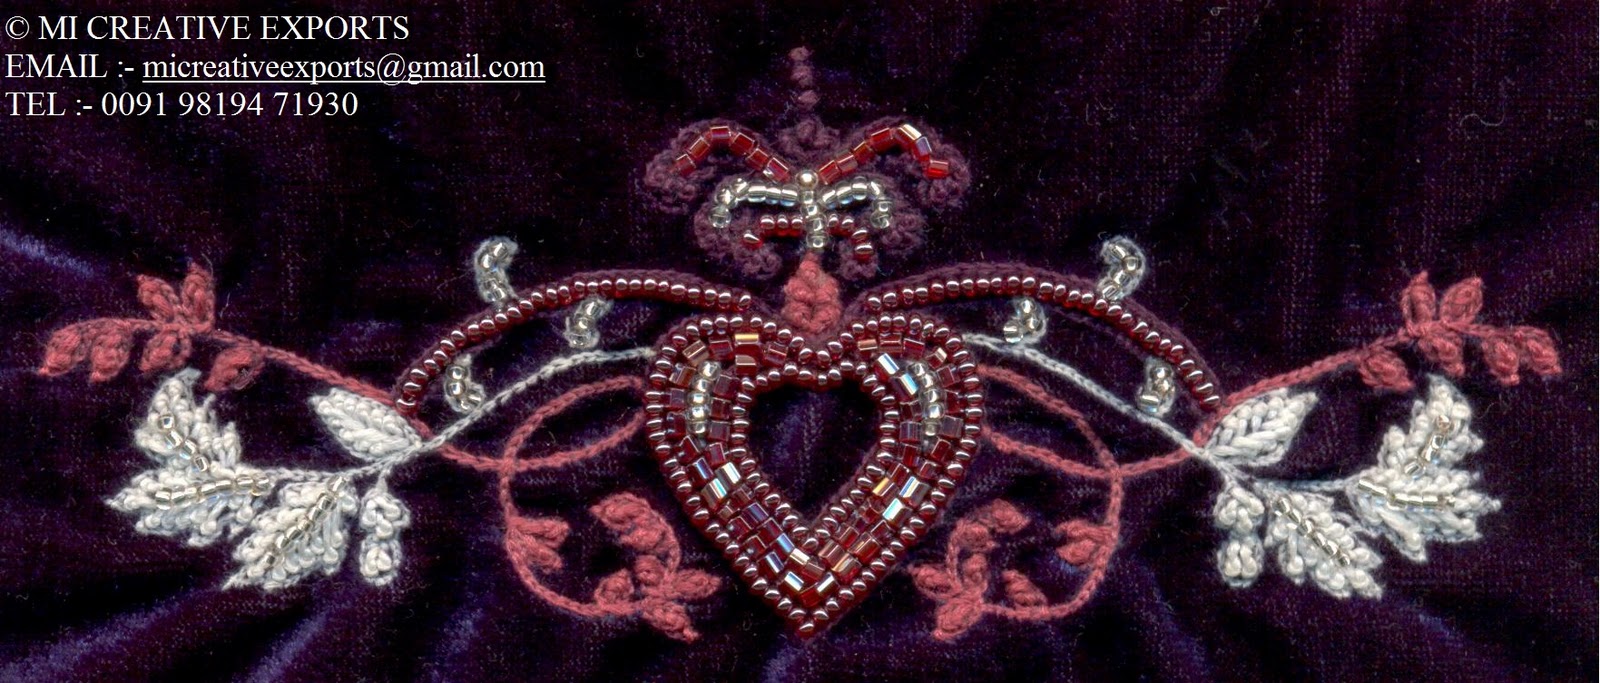 Hand Embroidery - Wholesale Suppliers,Wholesale Products,Indian